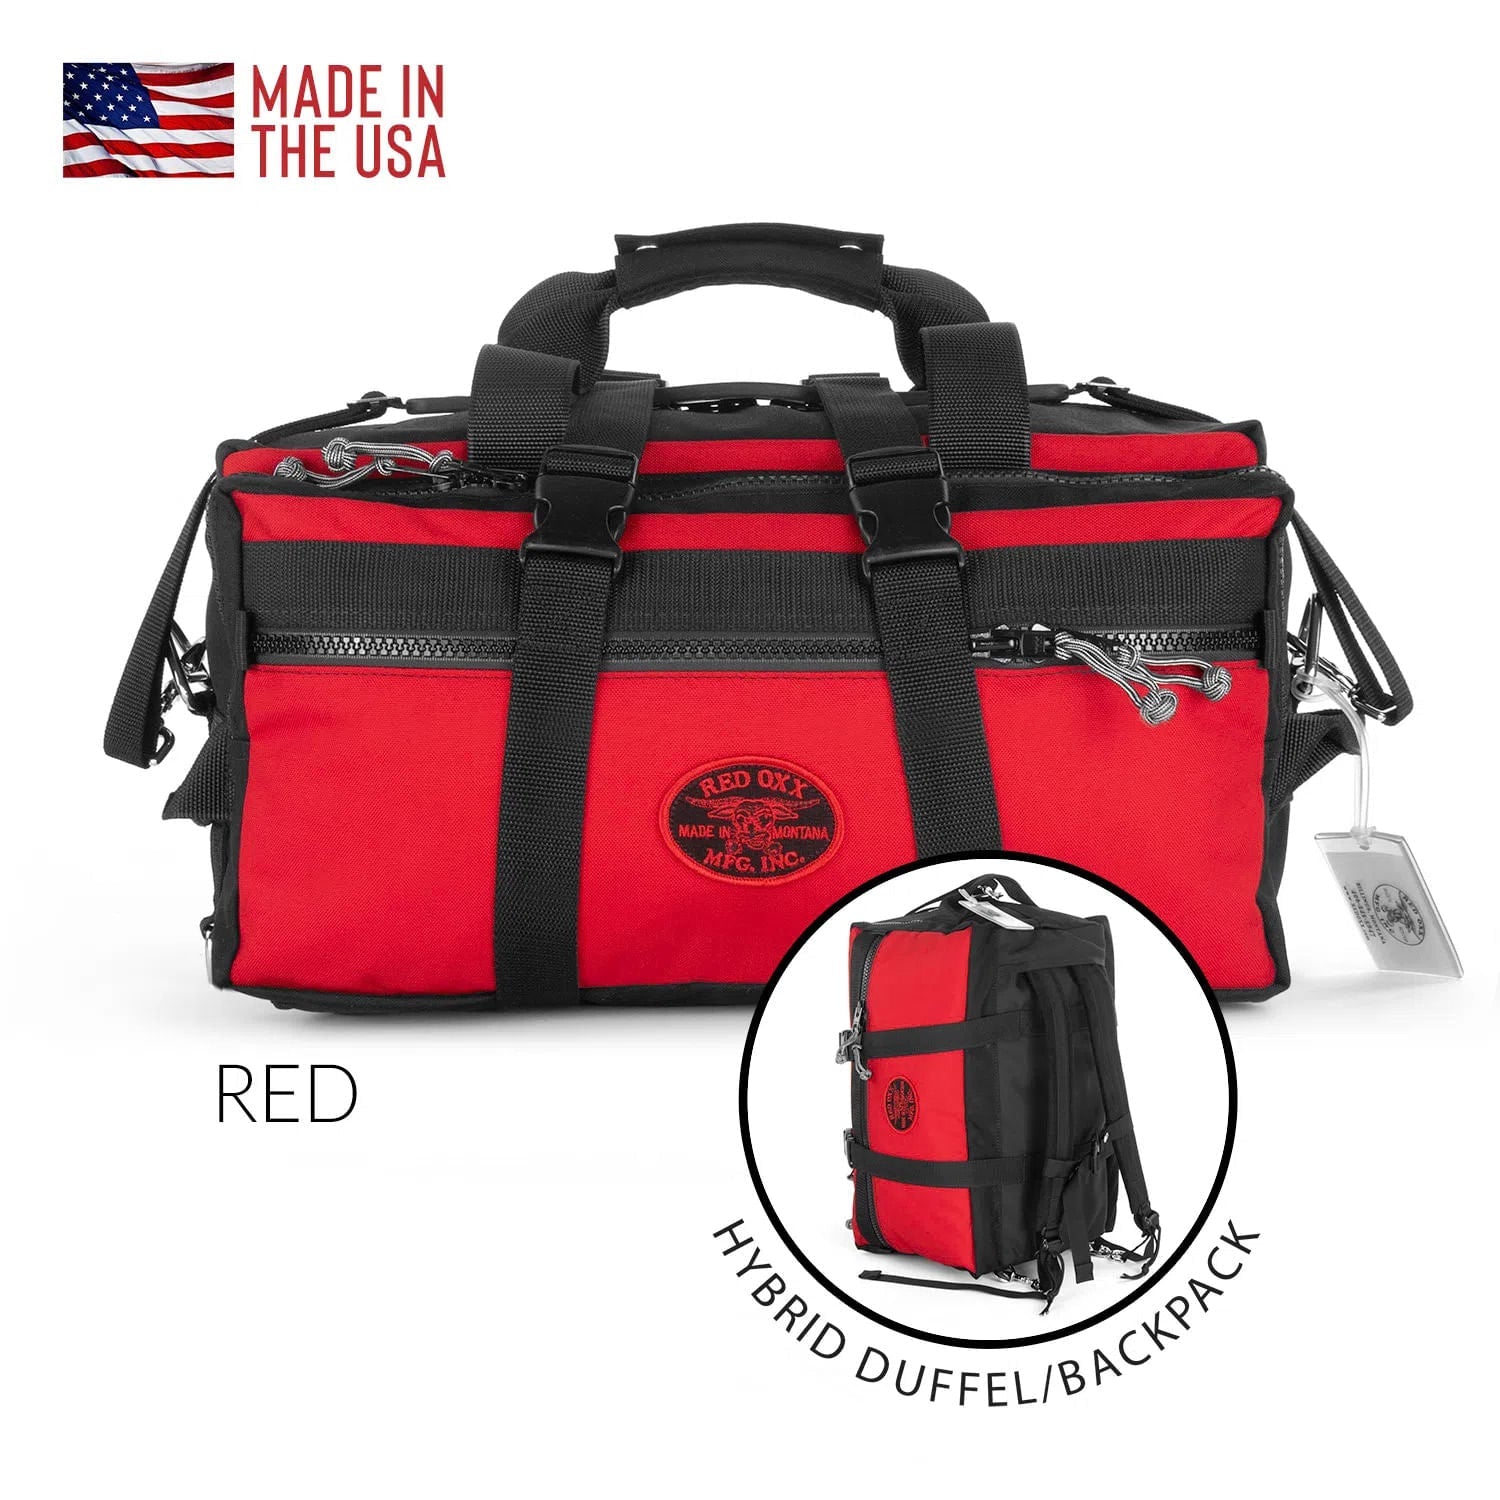 Red Oxx Lil Hombre convertible duffel hybrid backpack 